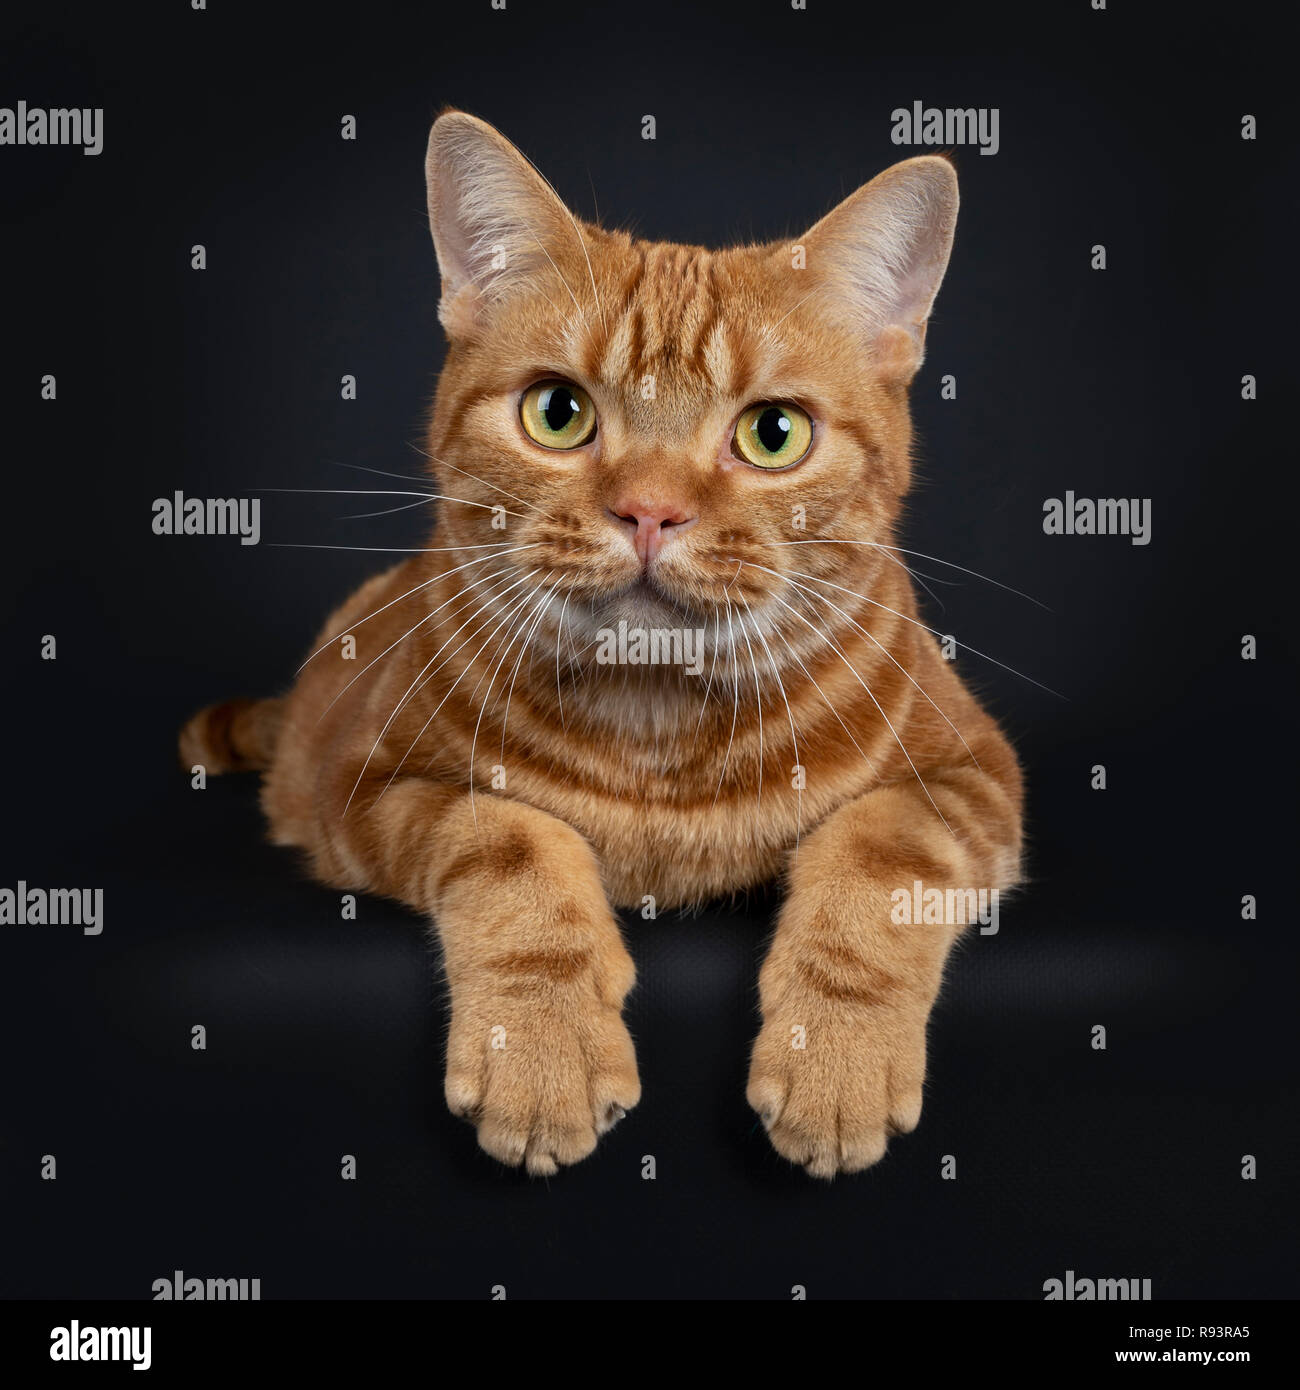 Adorable young adult red tabby American Shorthair cat, laying down with front paws hanging over edge. Looking at lens with yellow / green eyes. Isolat Stock Photo